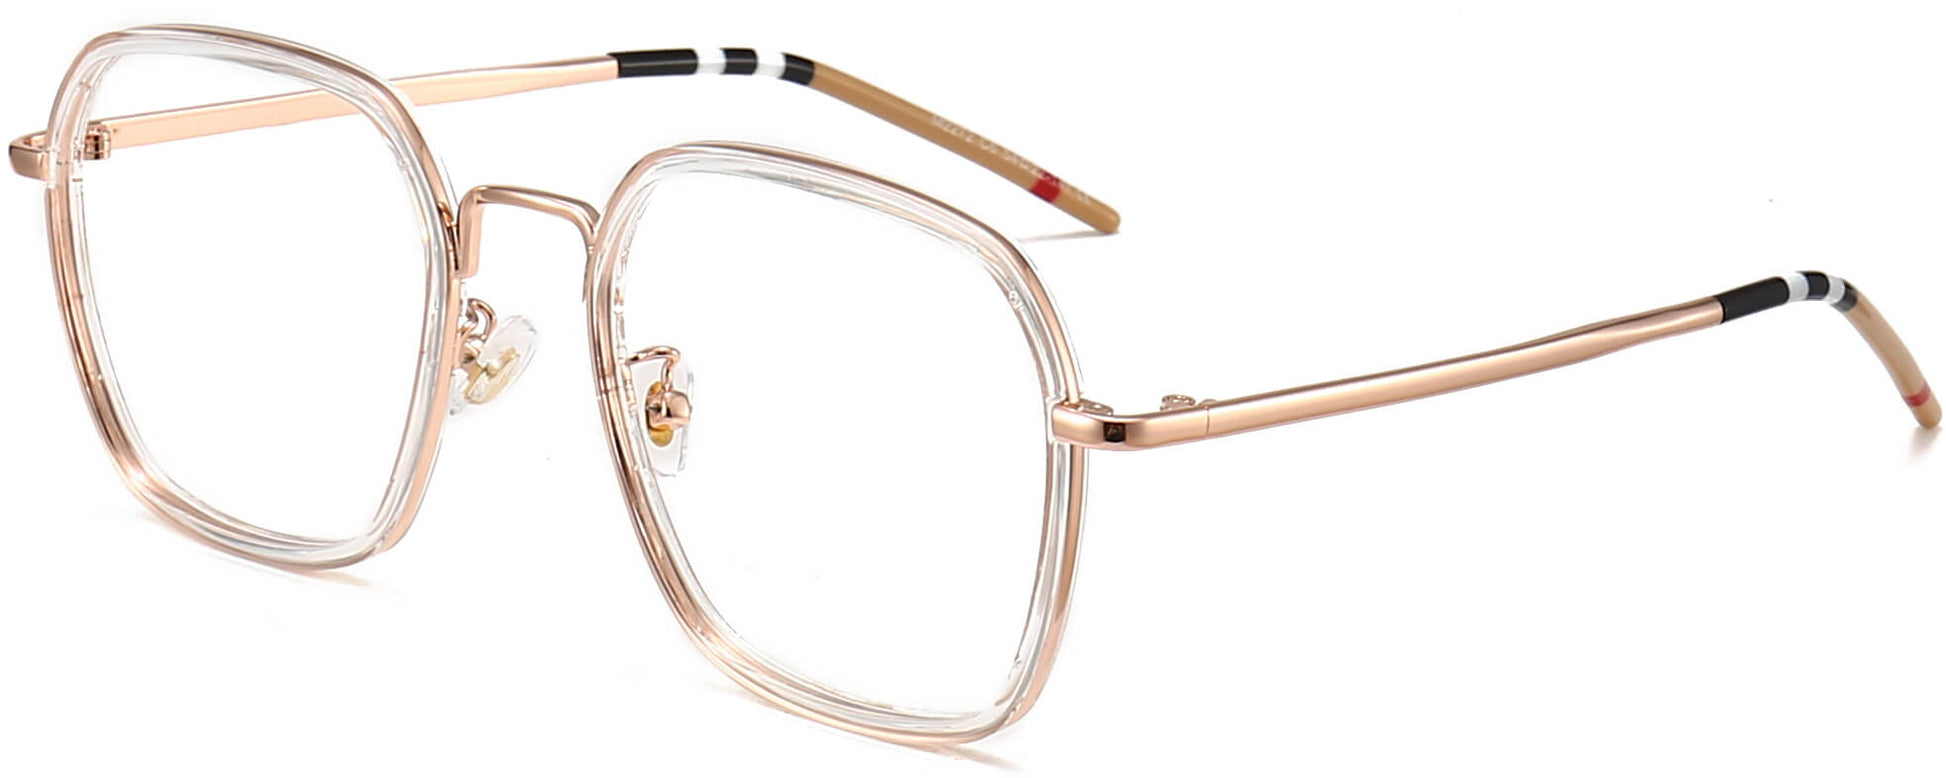 Penny Square Pink Eyeglasses from ANRRI, angle view